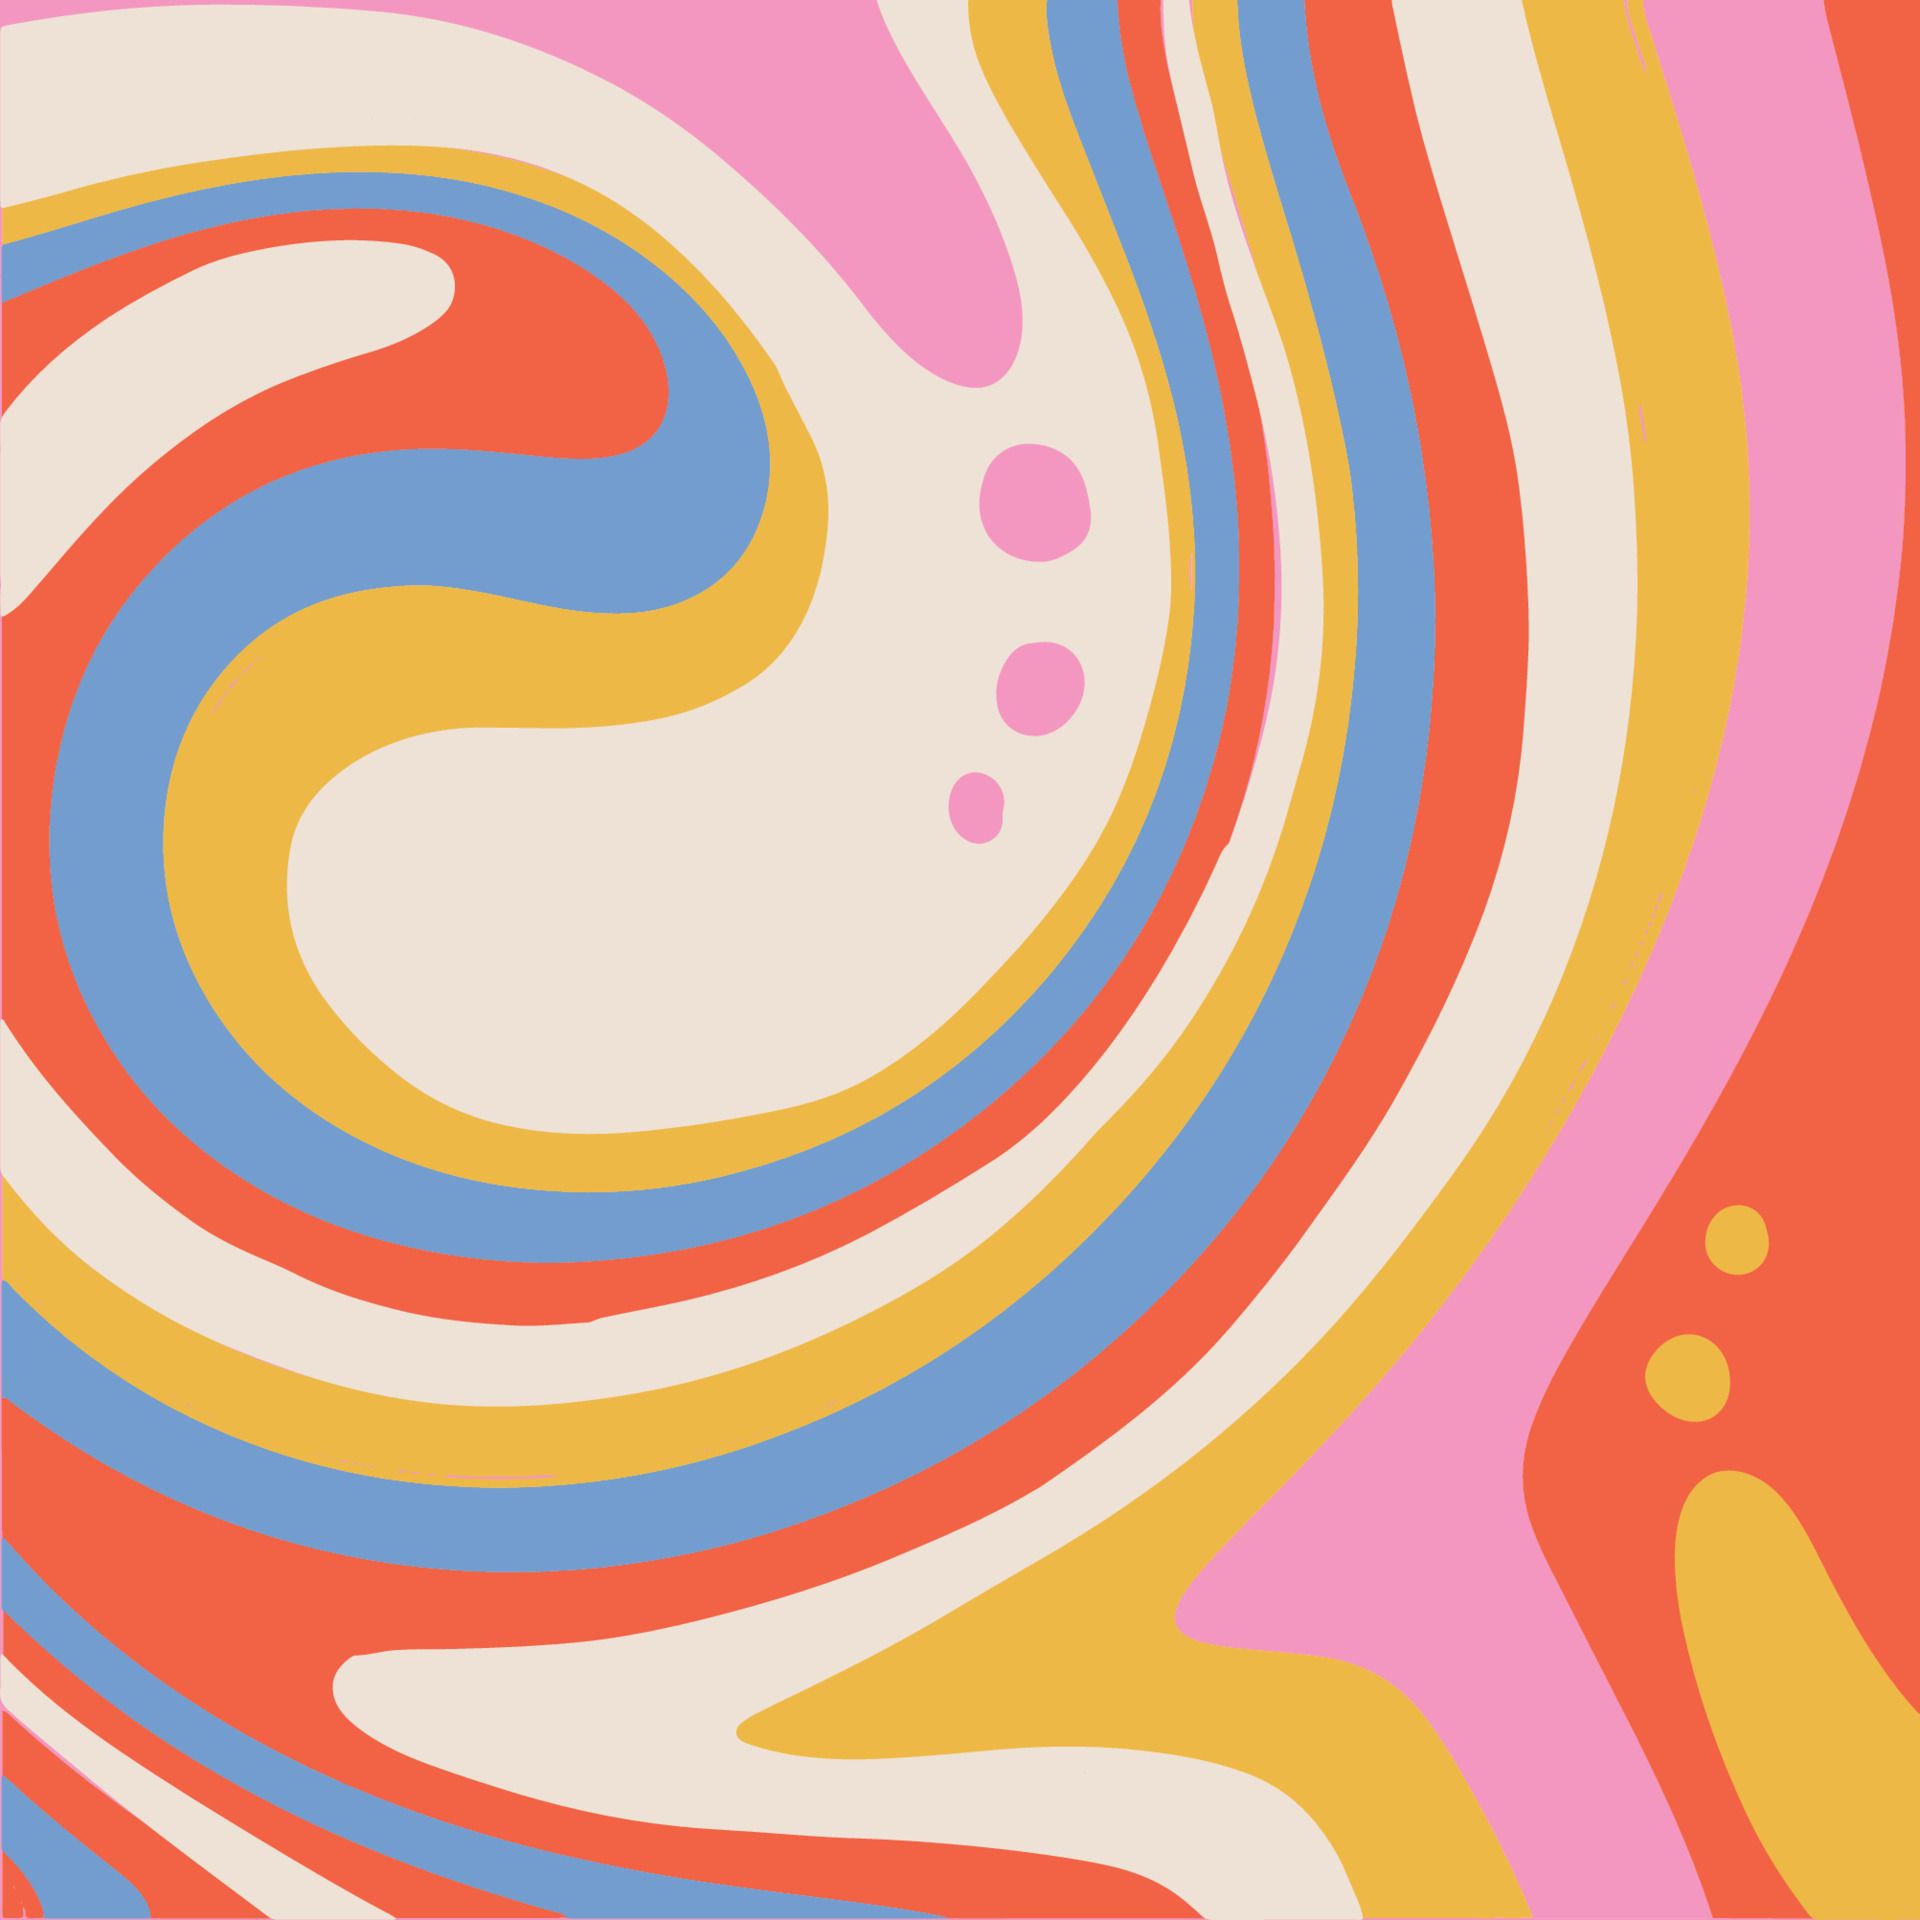 Psychedelic 1970 Retro Background With Fluid Shapes And Drops. 1960s Hippie Wallpaper Design. Trippy Glitchy Backdrop For Psychedelic 60s 70s Parties With Vintage Rainbow Colors And Groov. Vector